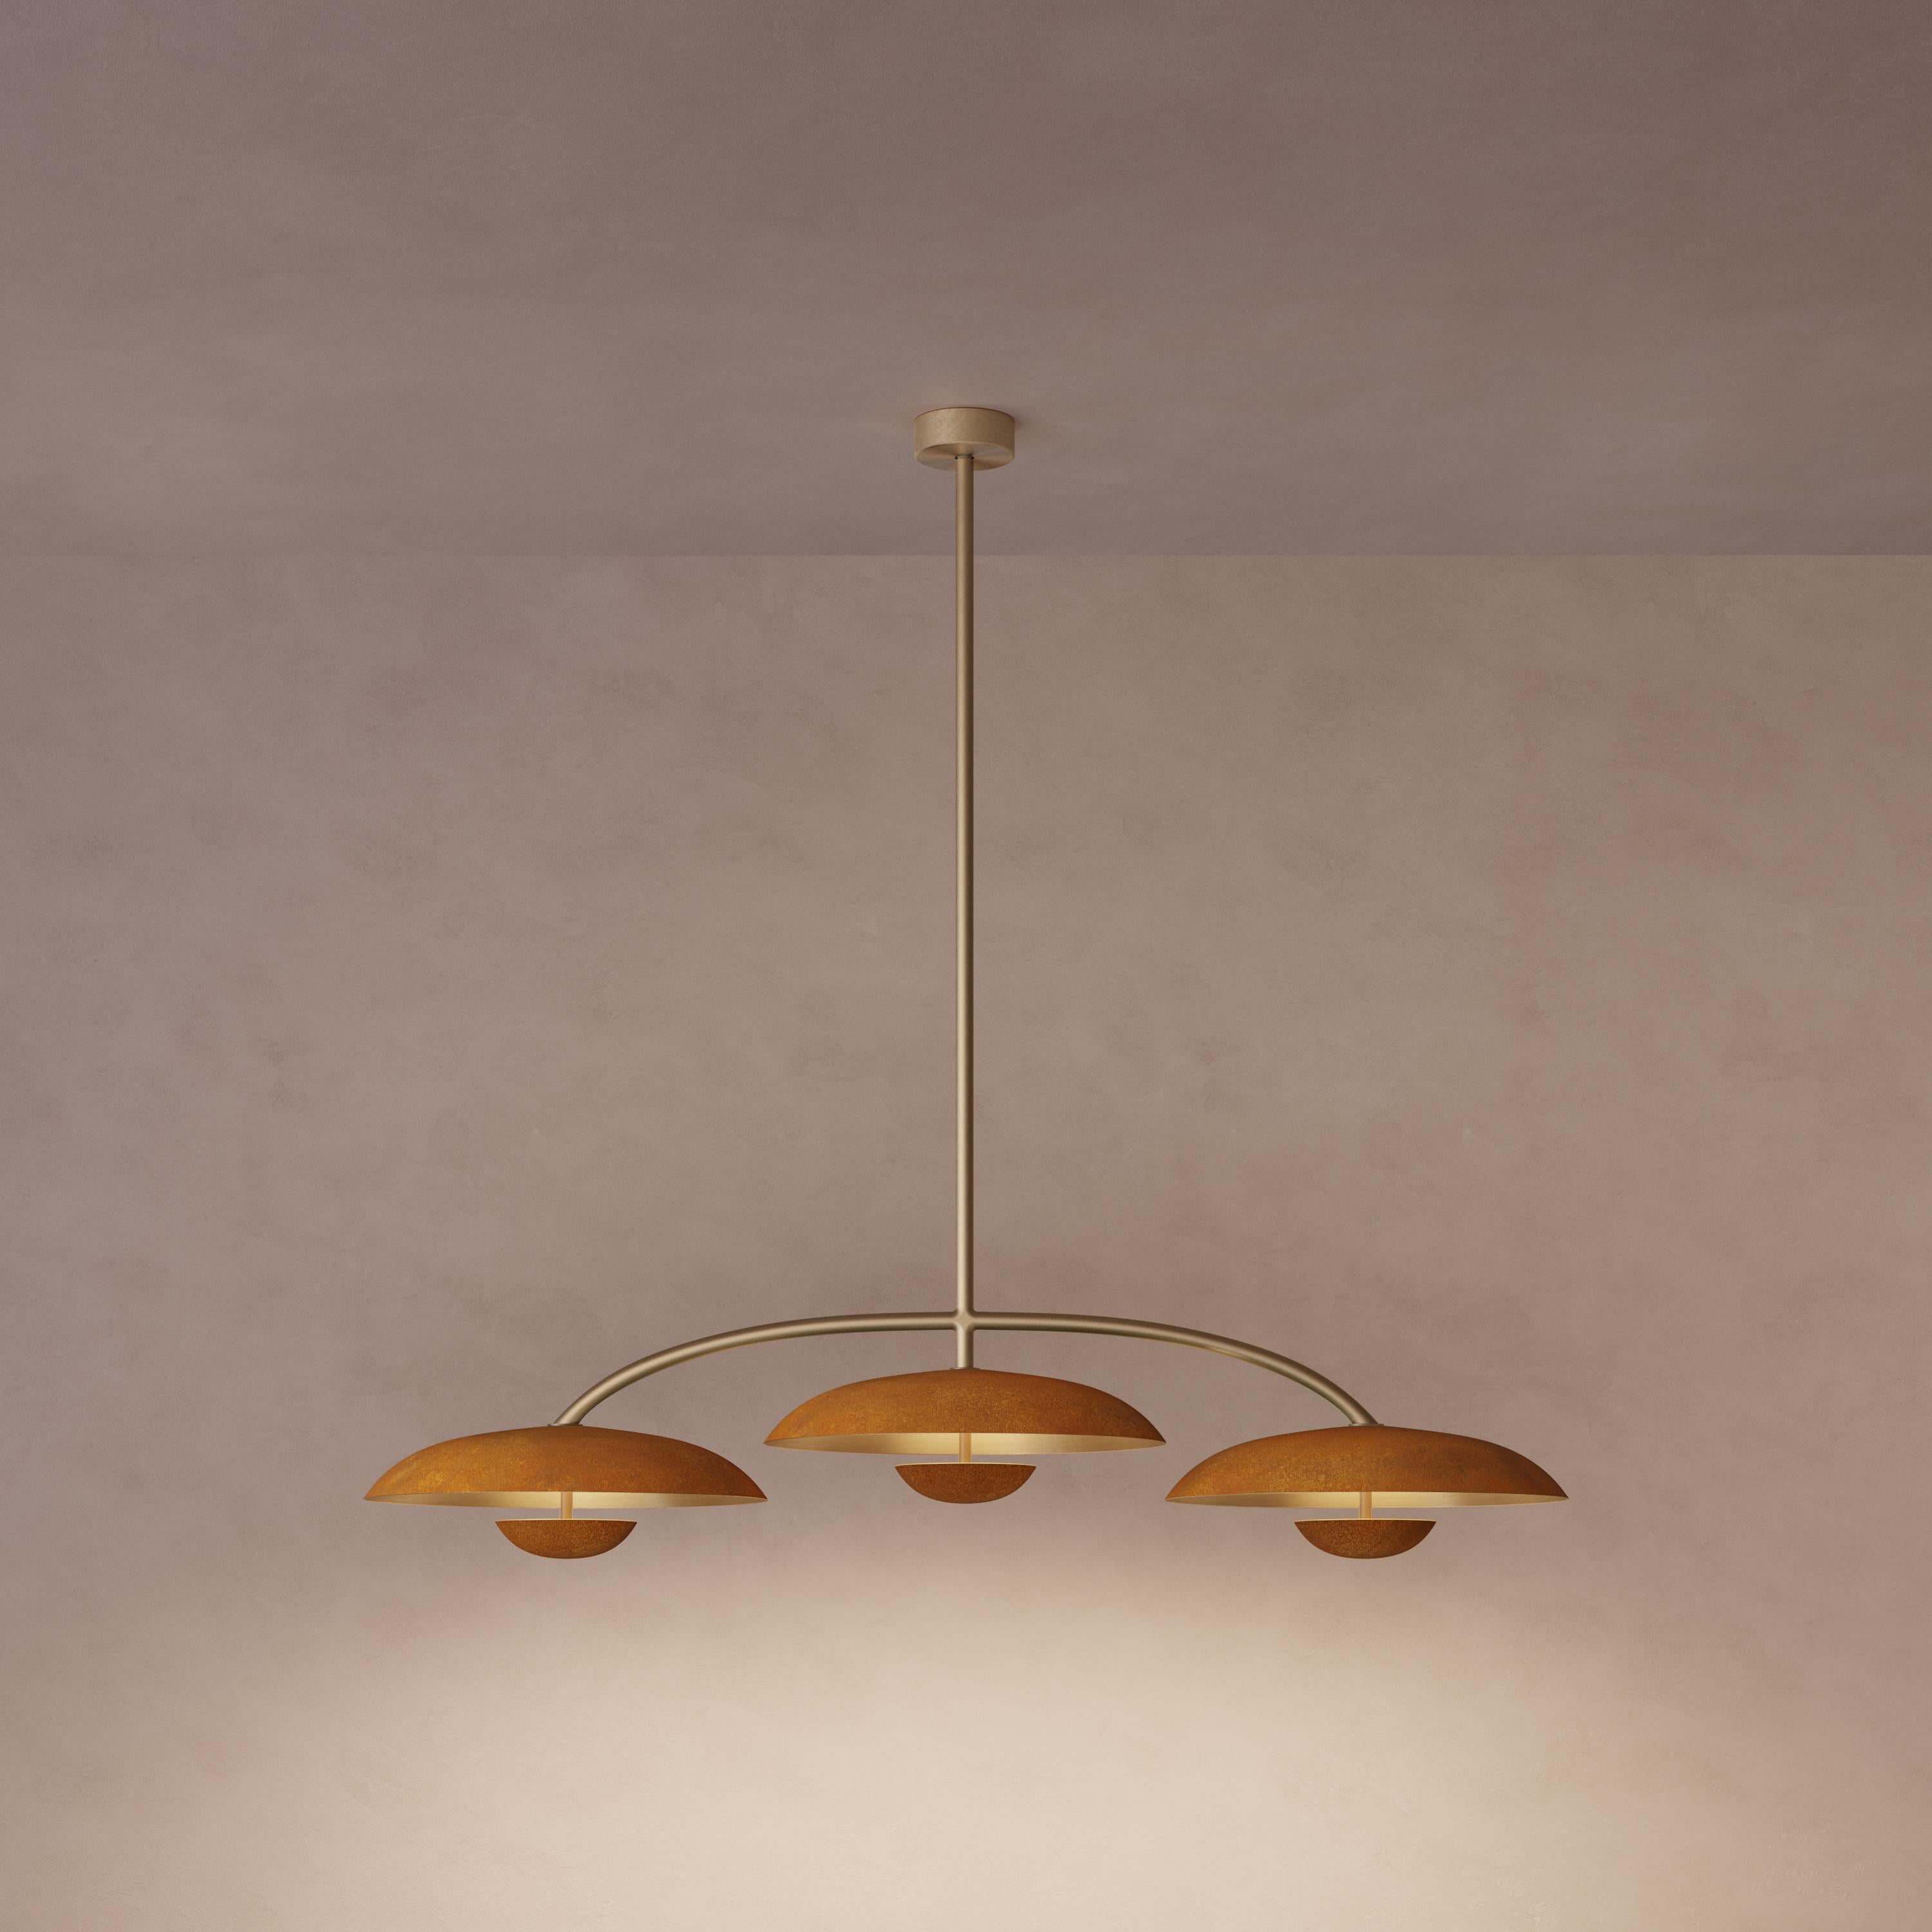 Trio for three, a unique ceiling light composed of a cluster of lighting components. Combining patinated brass plates and finely brushed brass framework, the Orbit Trio ceiling light is softly illuminated with LED elements from within. This